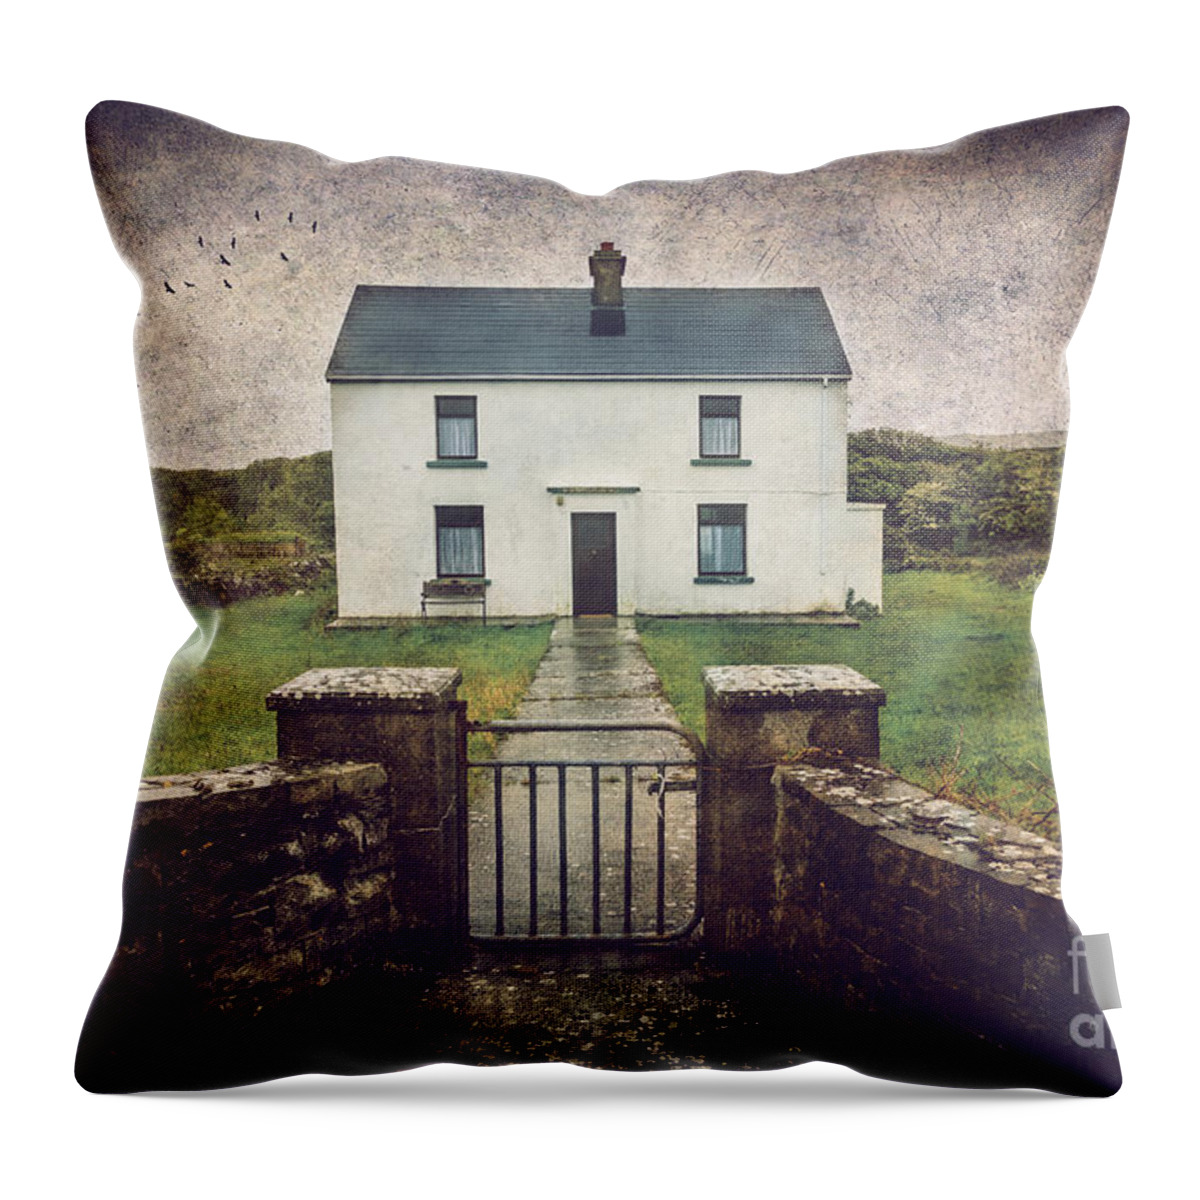 Aran Islands Throw Pillow featuring the photograph White House of Aran Island I by Craig J Satterlee